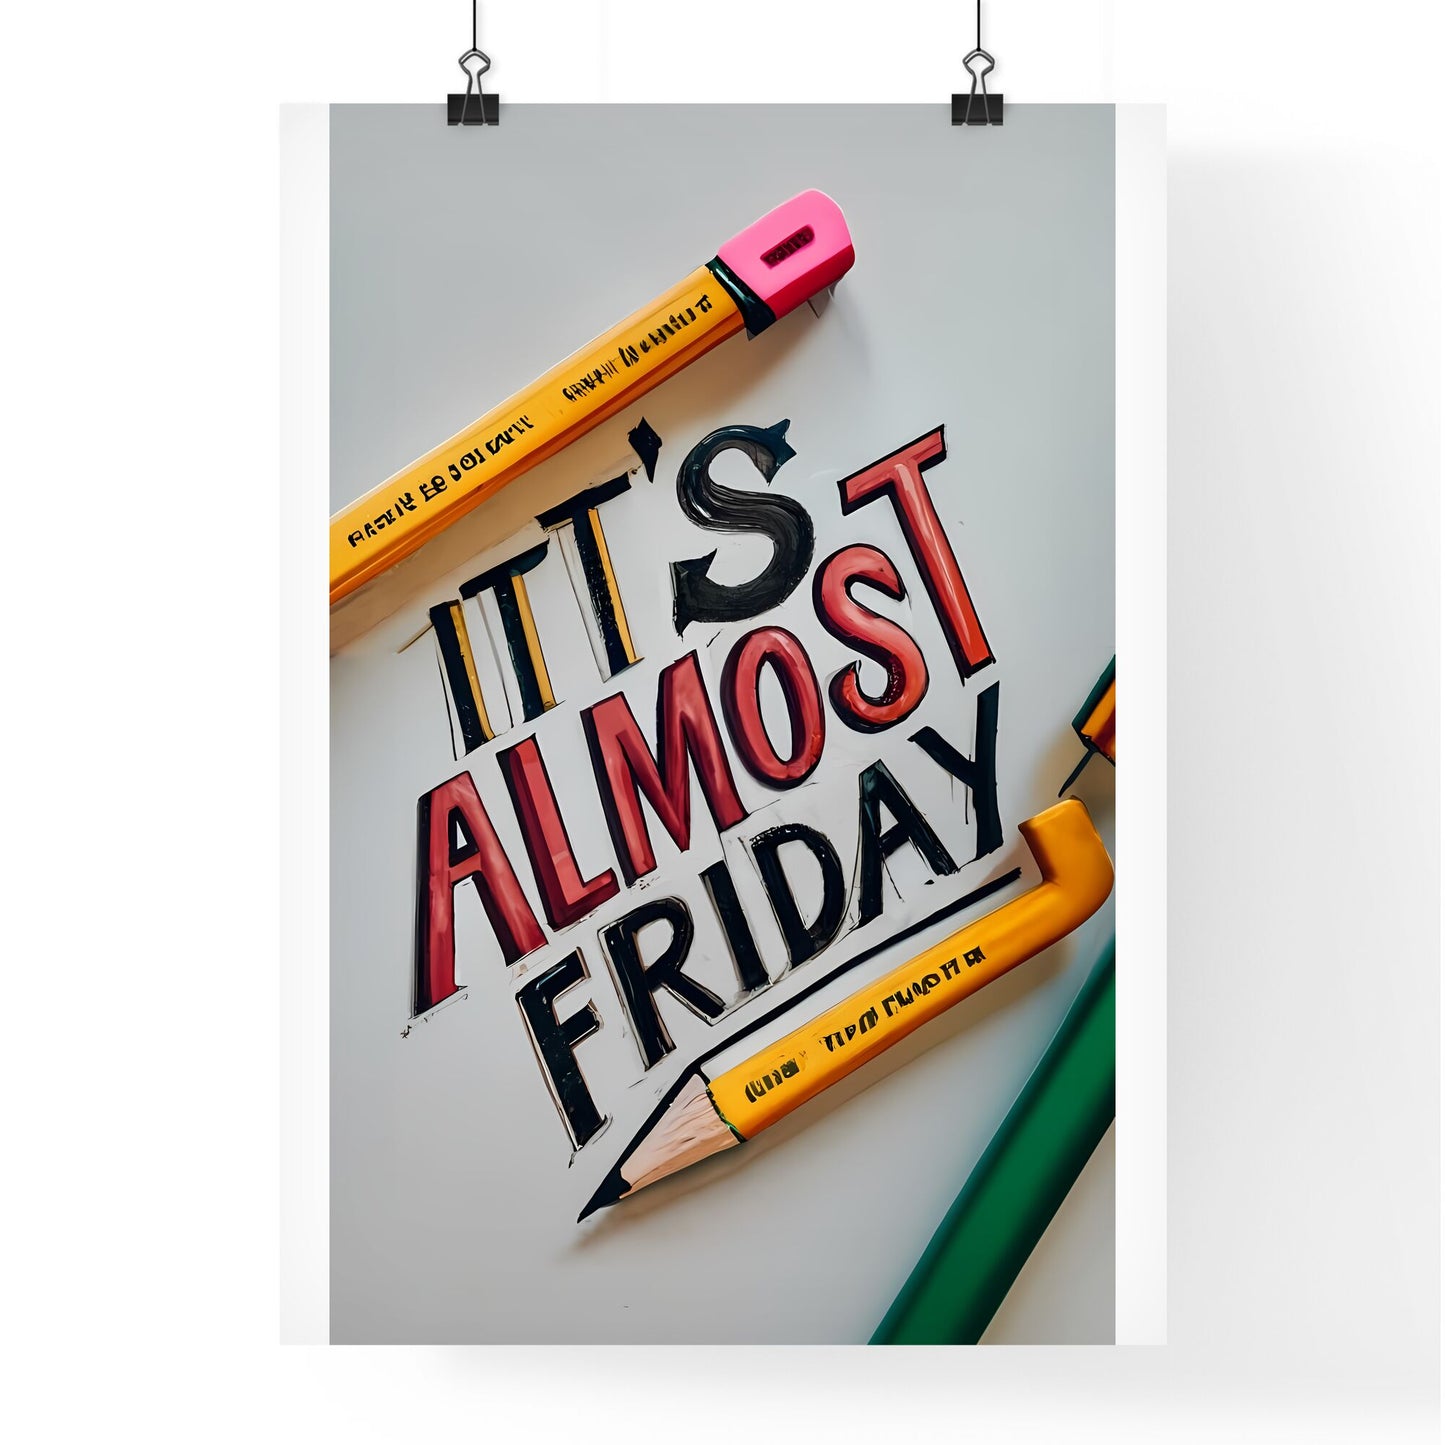 Itts Almost Friday - A Drawing Of A Pencil And A Paintbrush Art Print Default Title